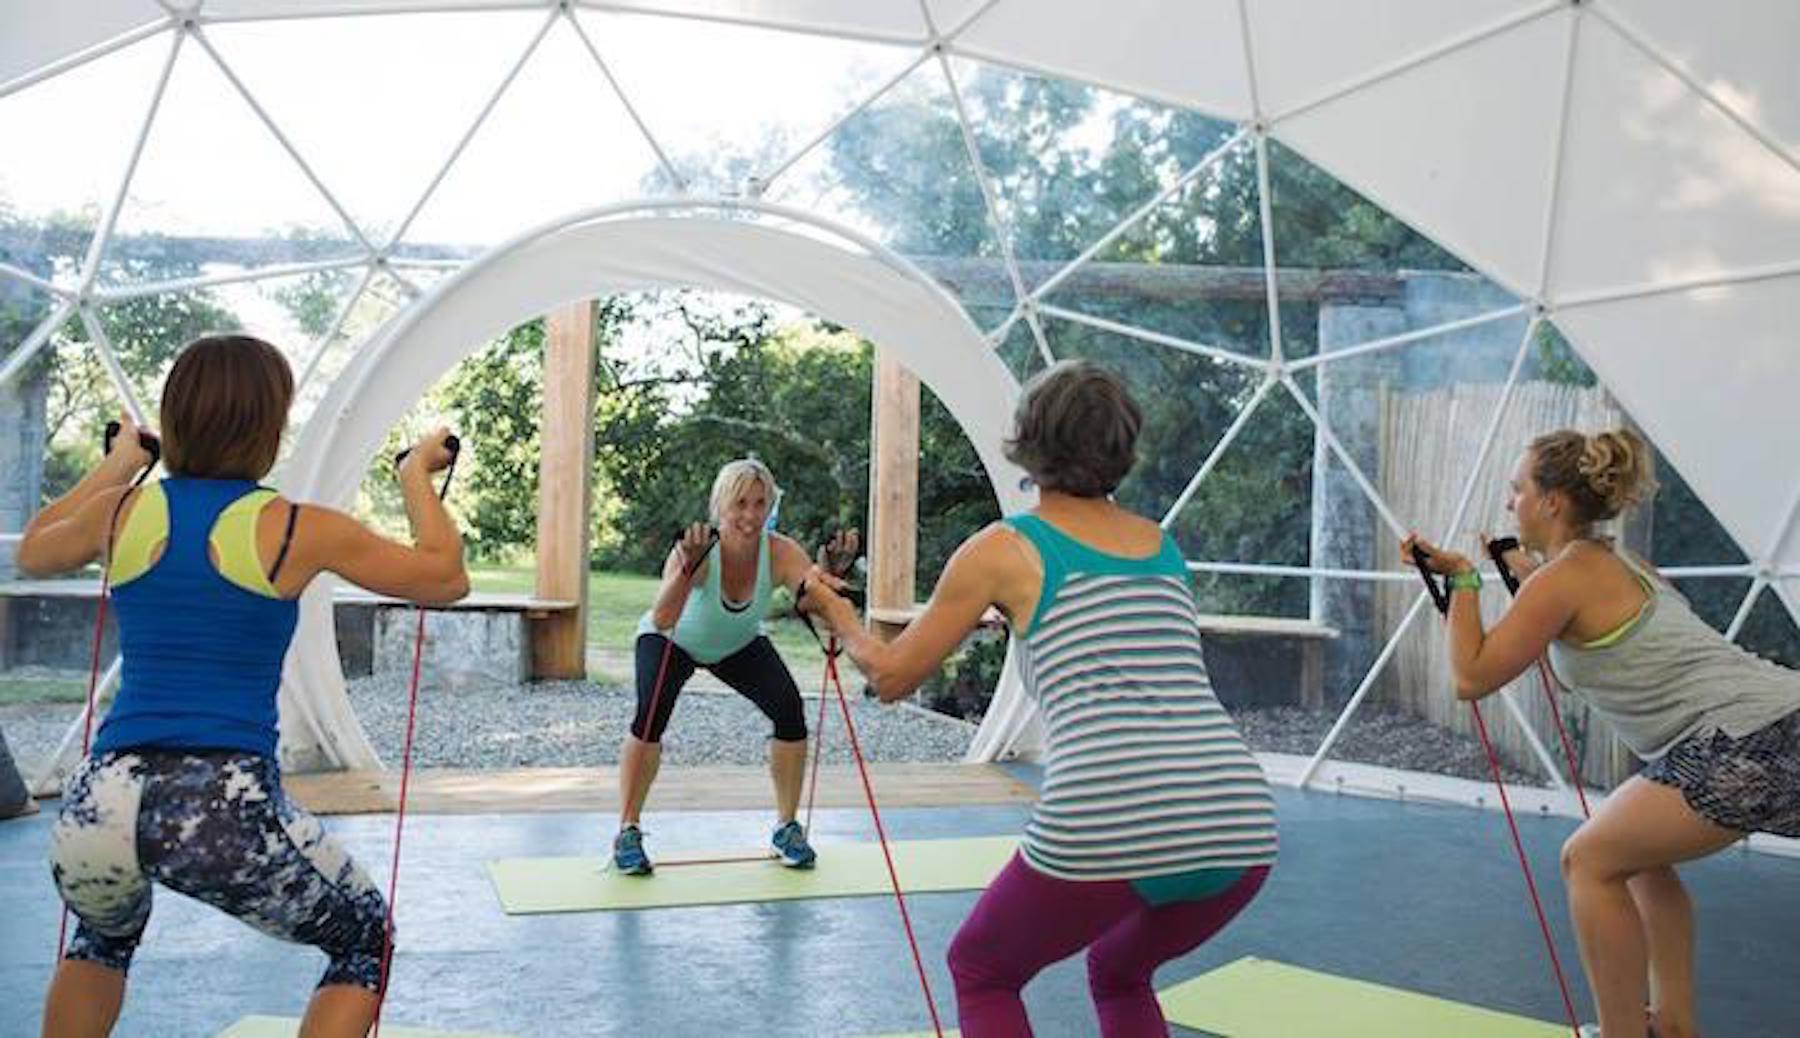 women practicing yoga in a geodesic dome